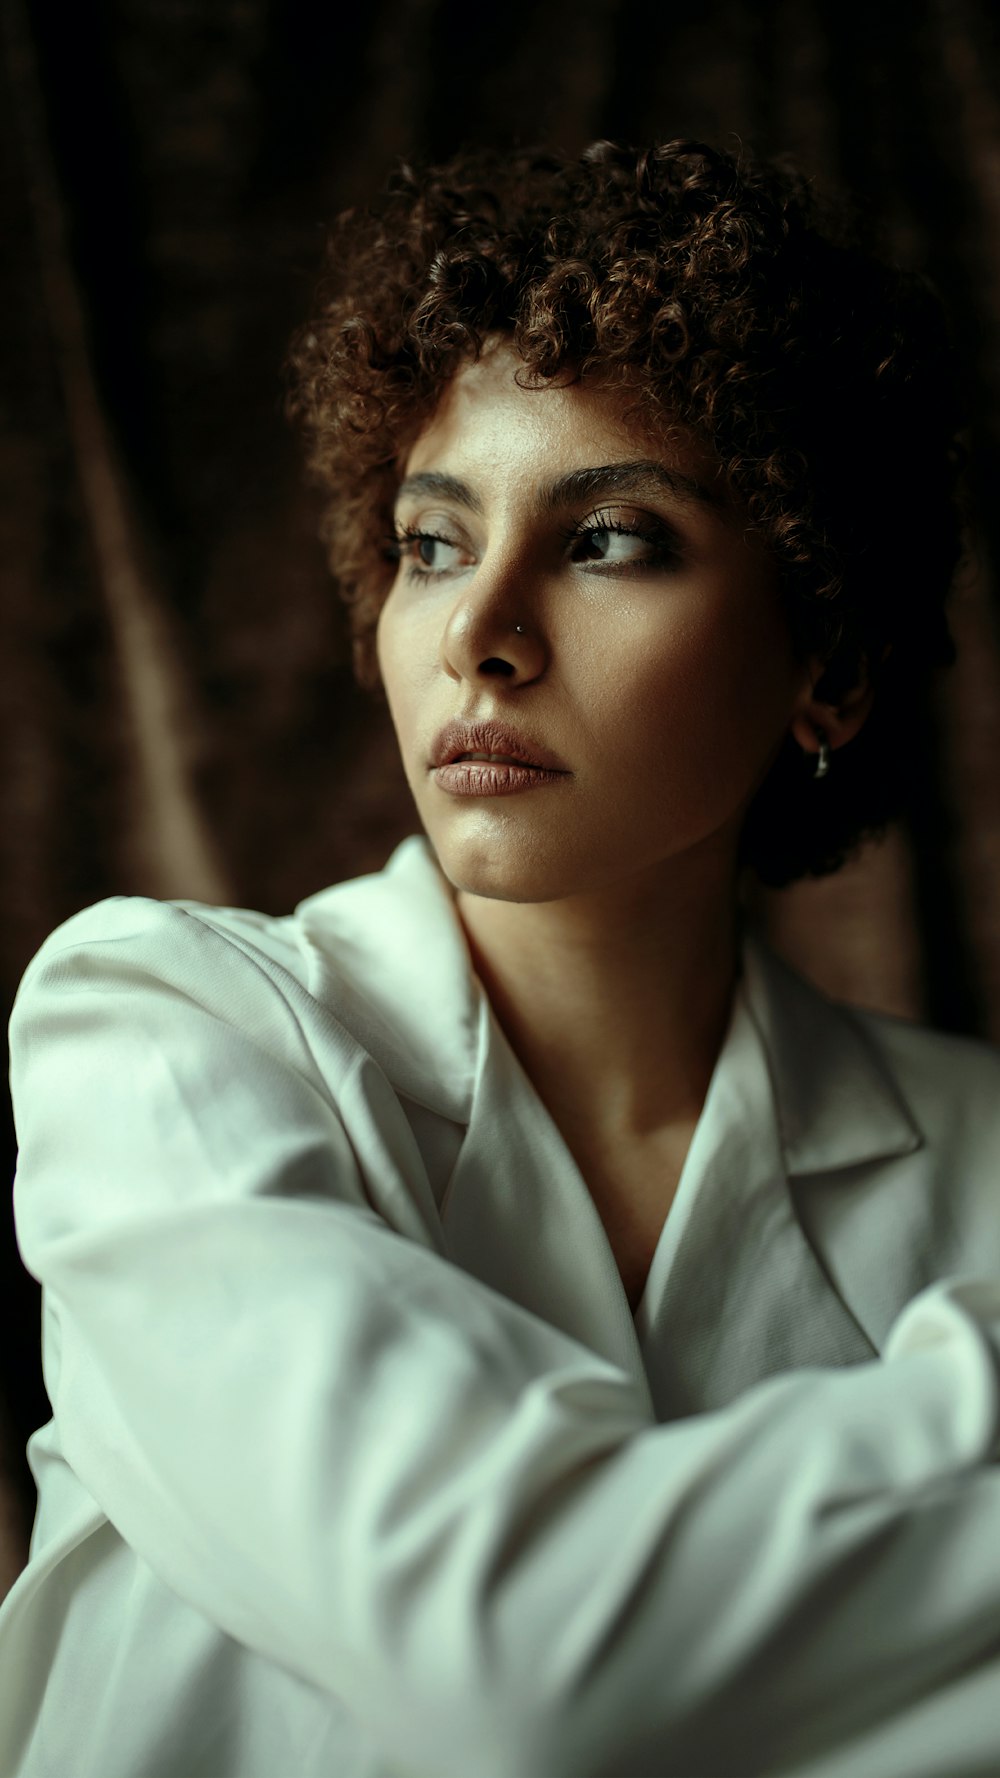 a woman with curly hair wearing a white shirt